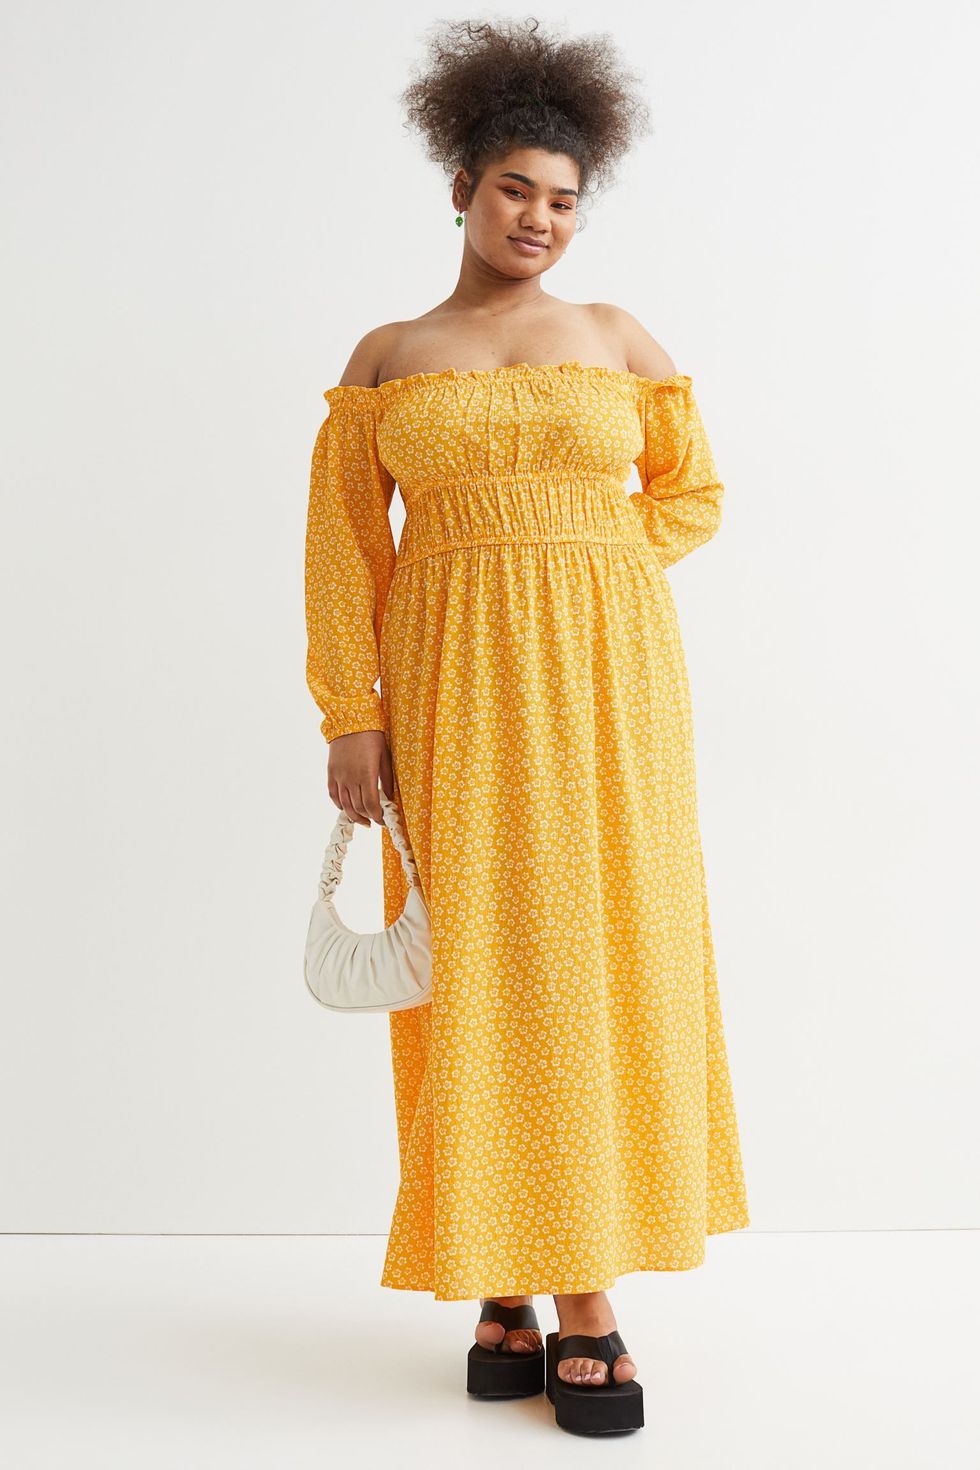 23 plus-size dresses for every occasion 2022